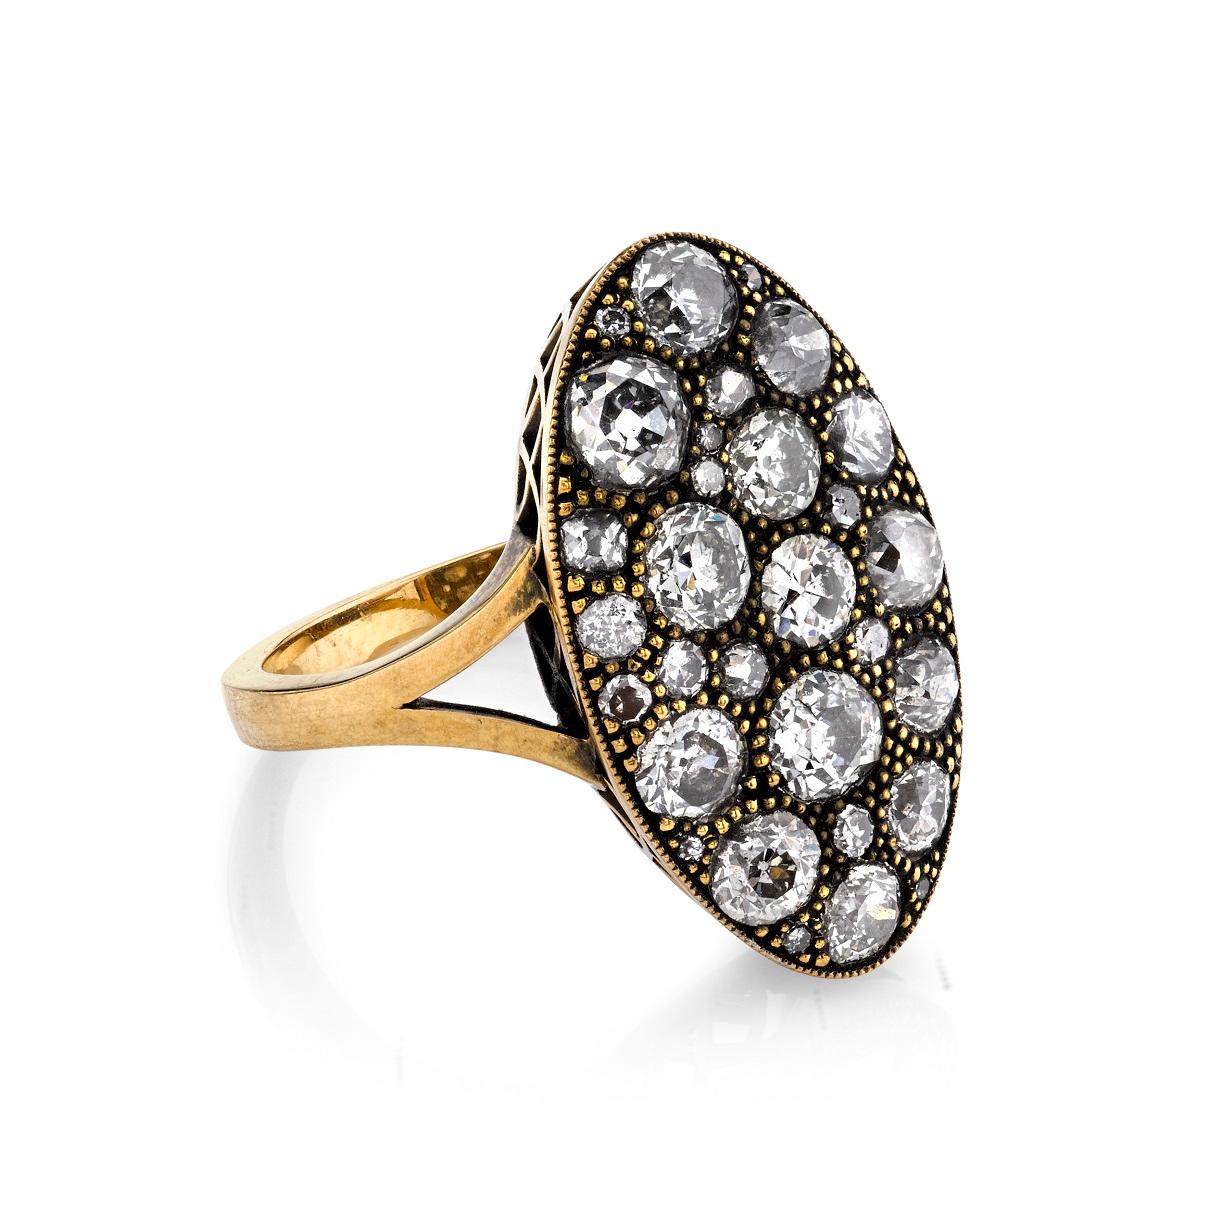 2.96ctw varying old cut and round brilliant cut diamonds in a handcrafted 18k oxidized yellow gold mounting. 

Price may vary according to total diamond weight. 

Ring is currently size 6. Please contact us about potential re-sizing.

Our jewelry is